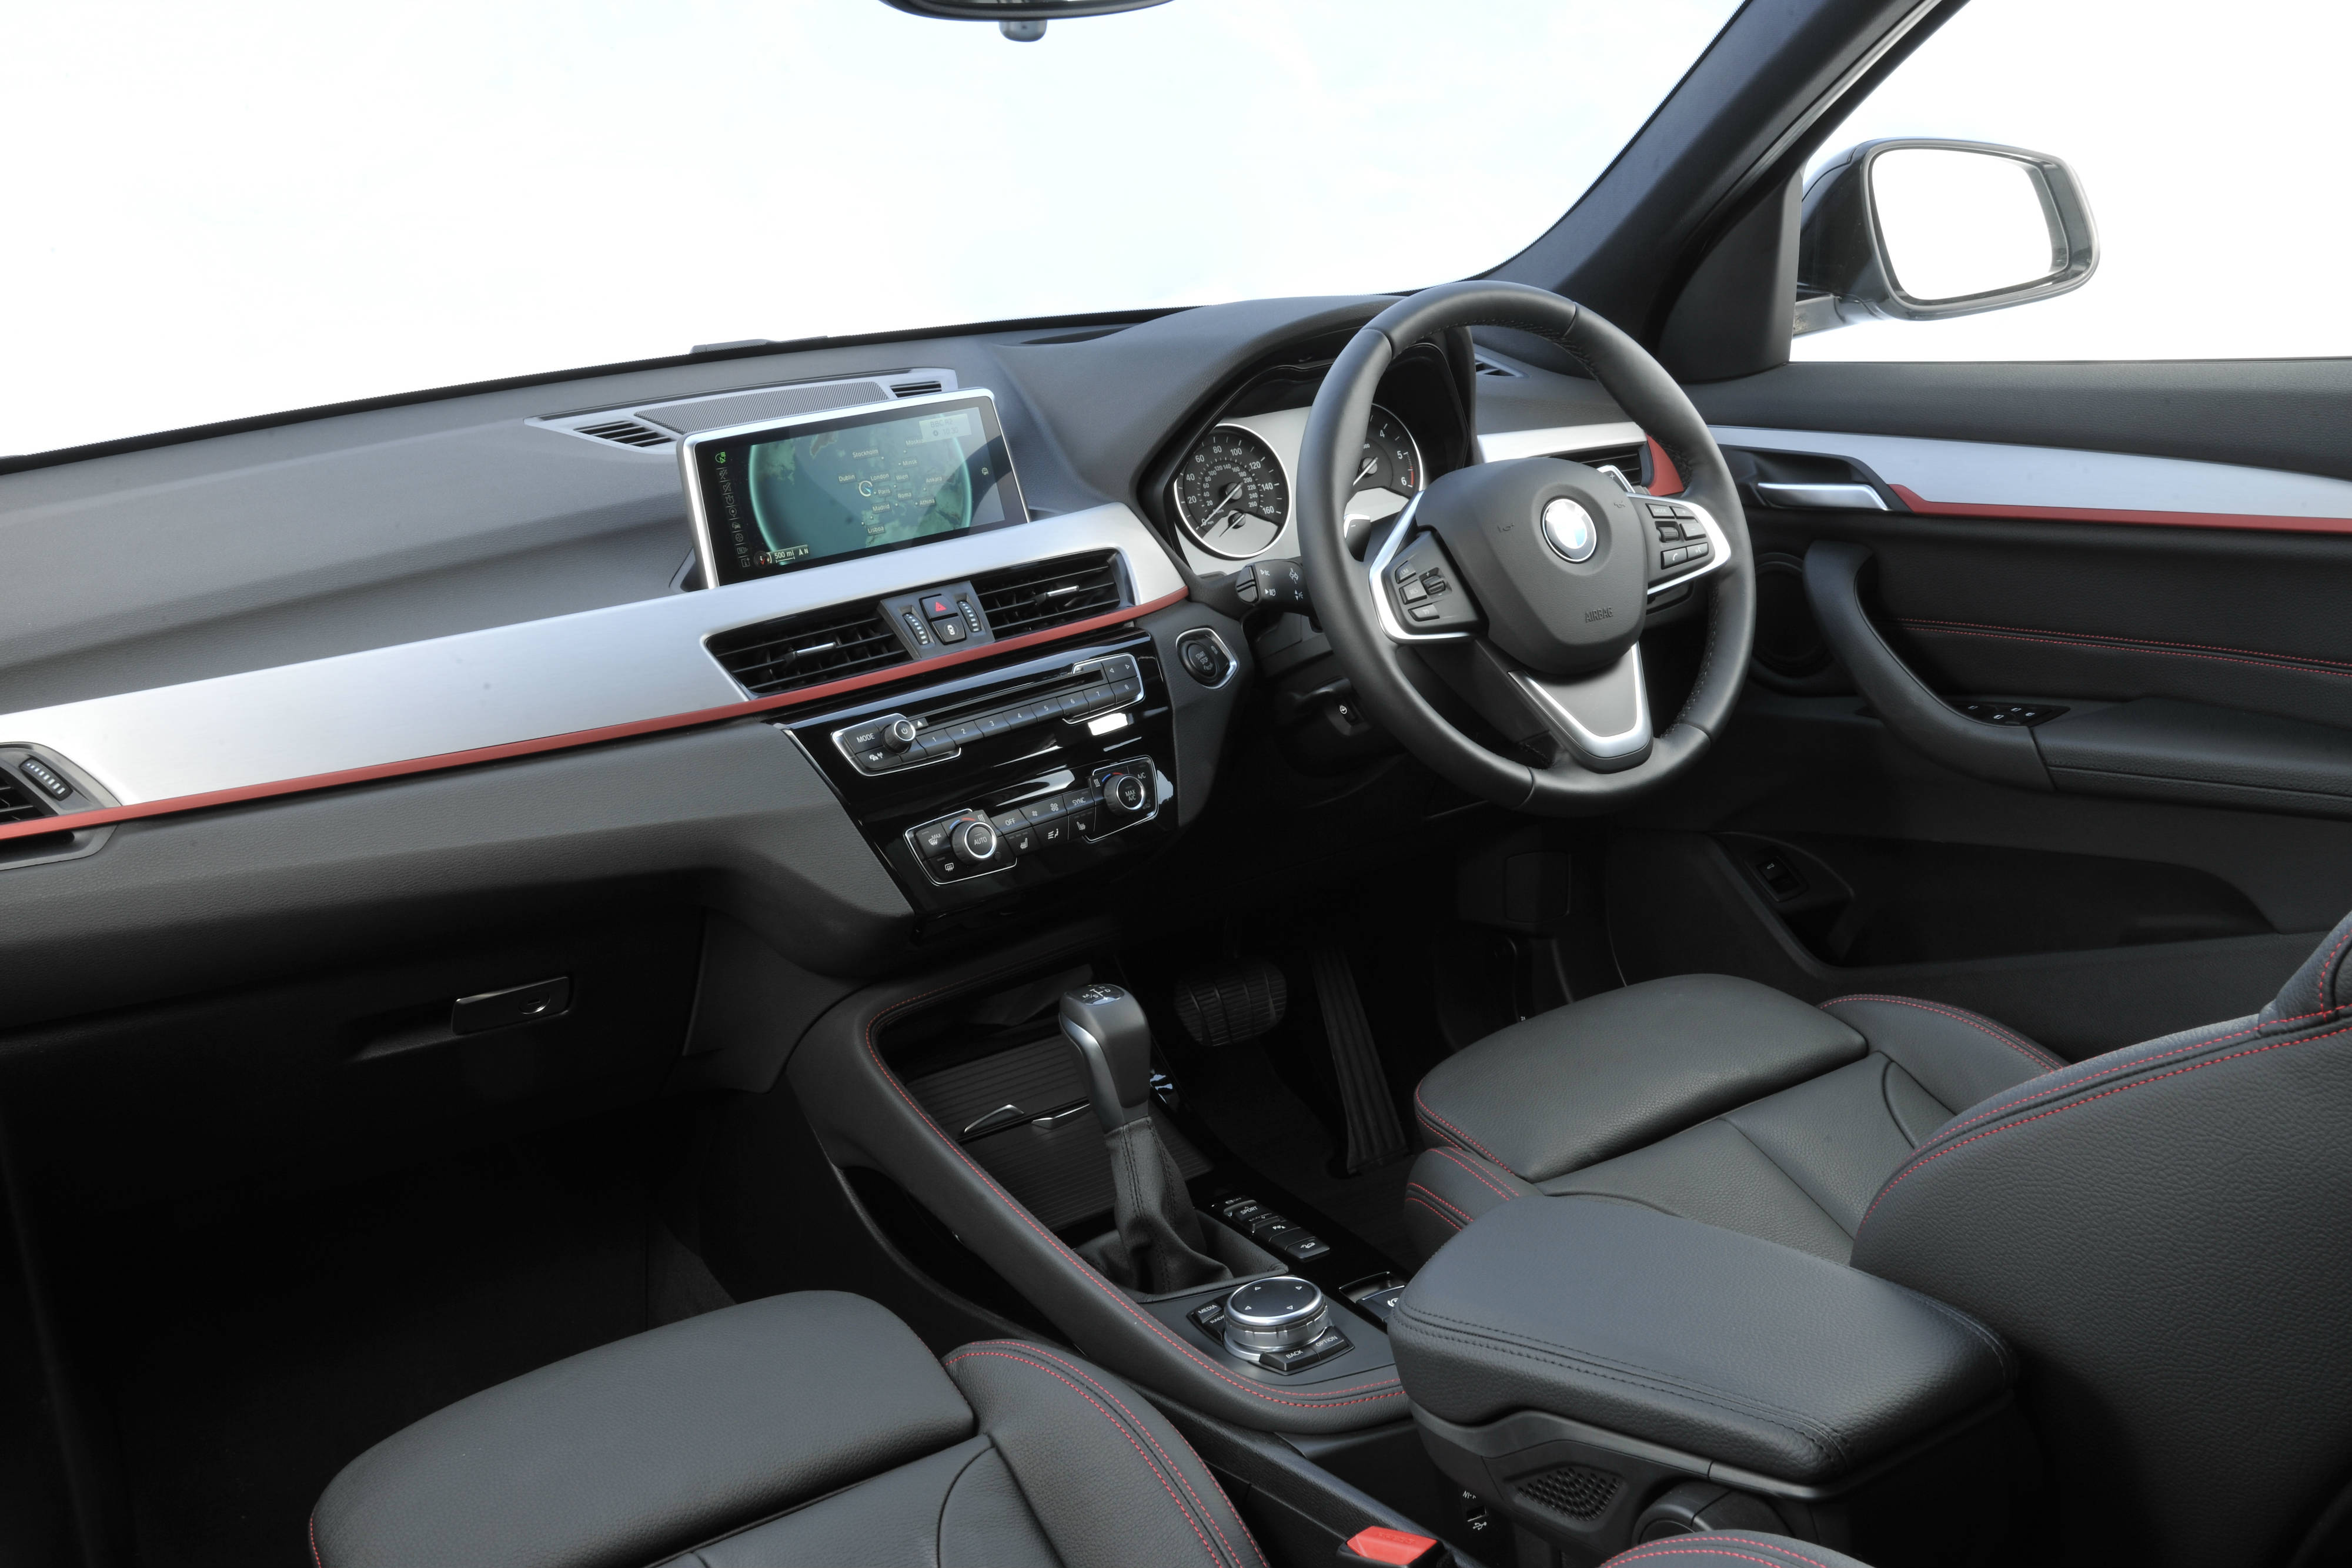 Classy cabin: 2015 BMW X1 review by The Sunday Times Driving